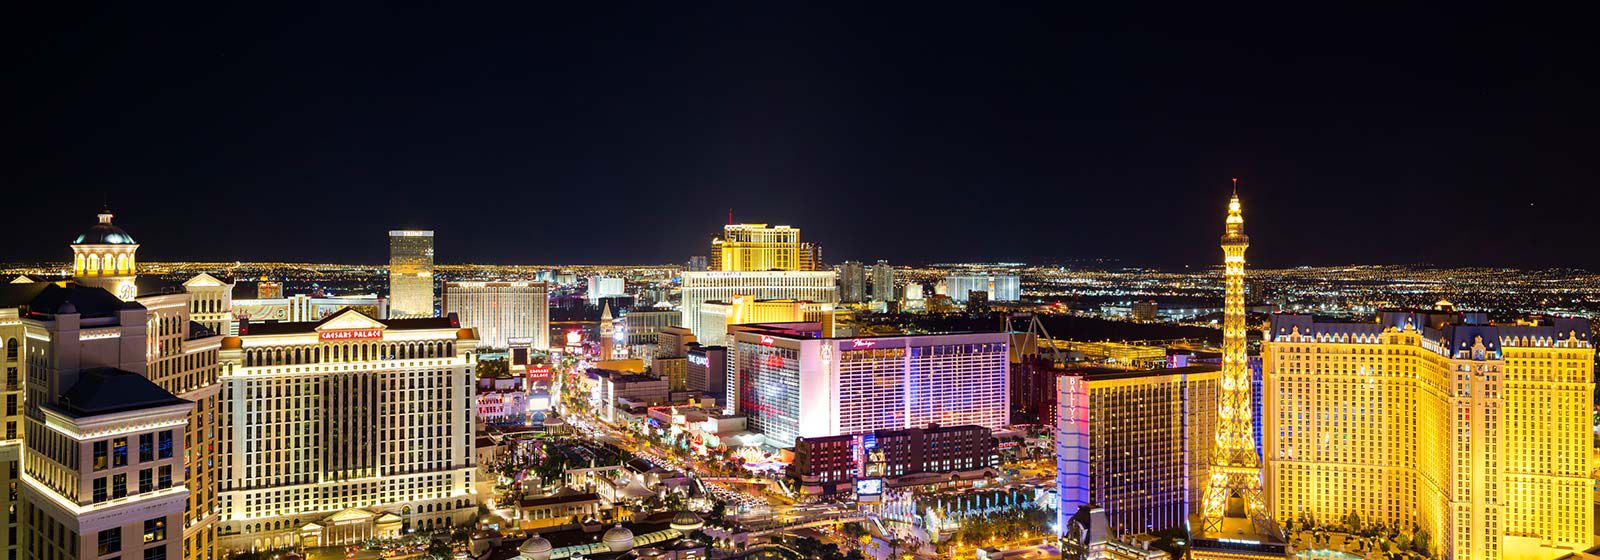 2 Las Vegas hotels offer a work-from-Las-Vegas travel package